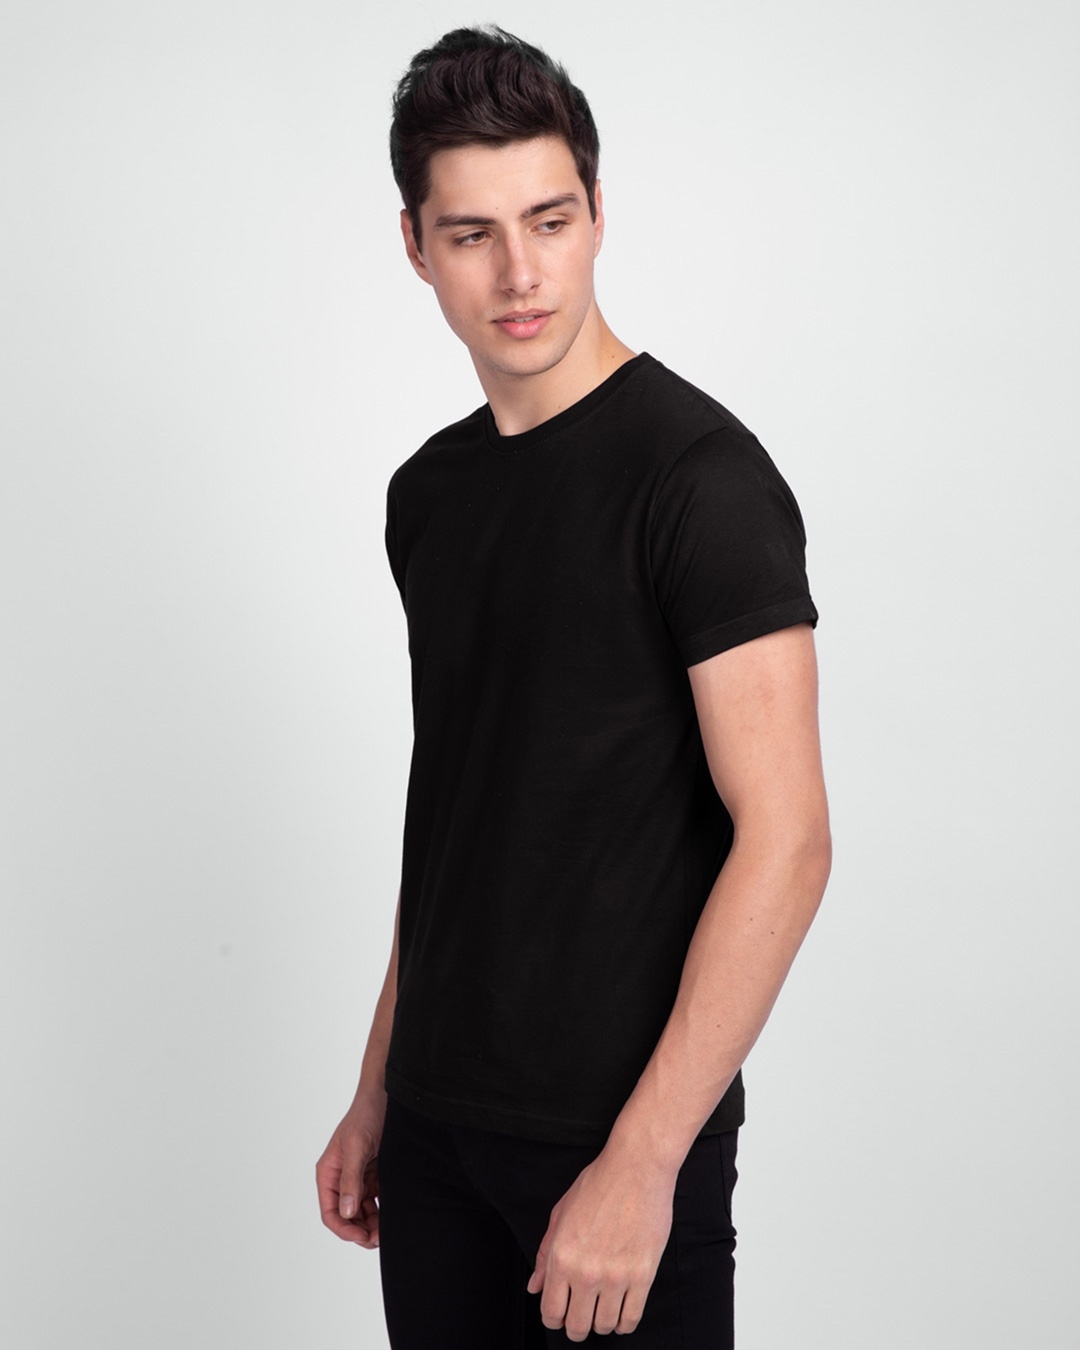 Shop Men's Black and White T-shirt Pack of 2